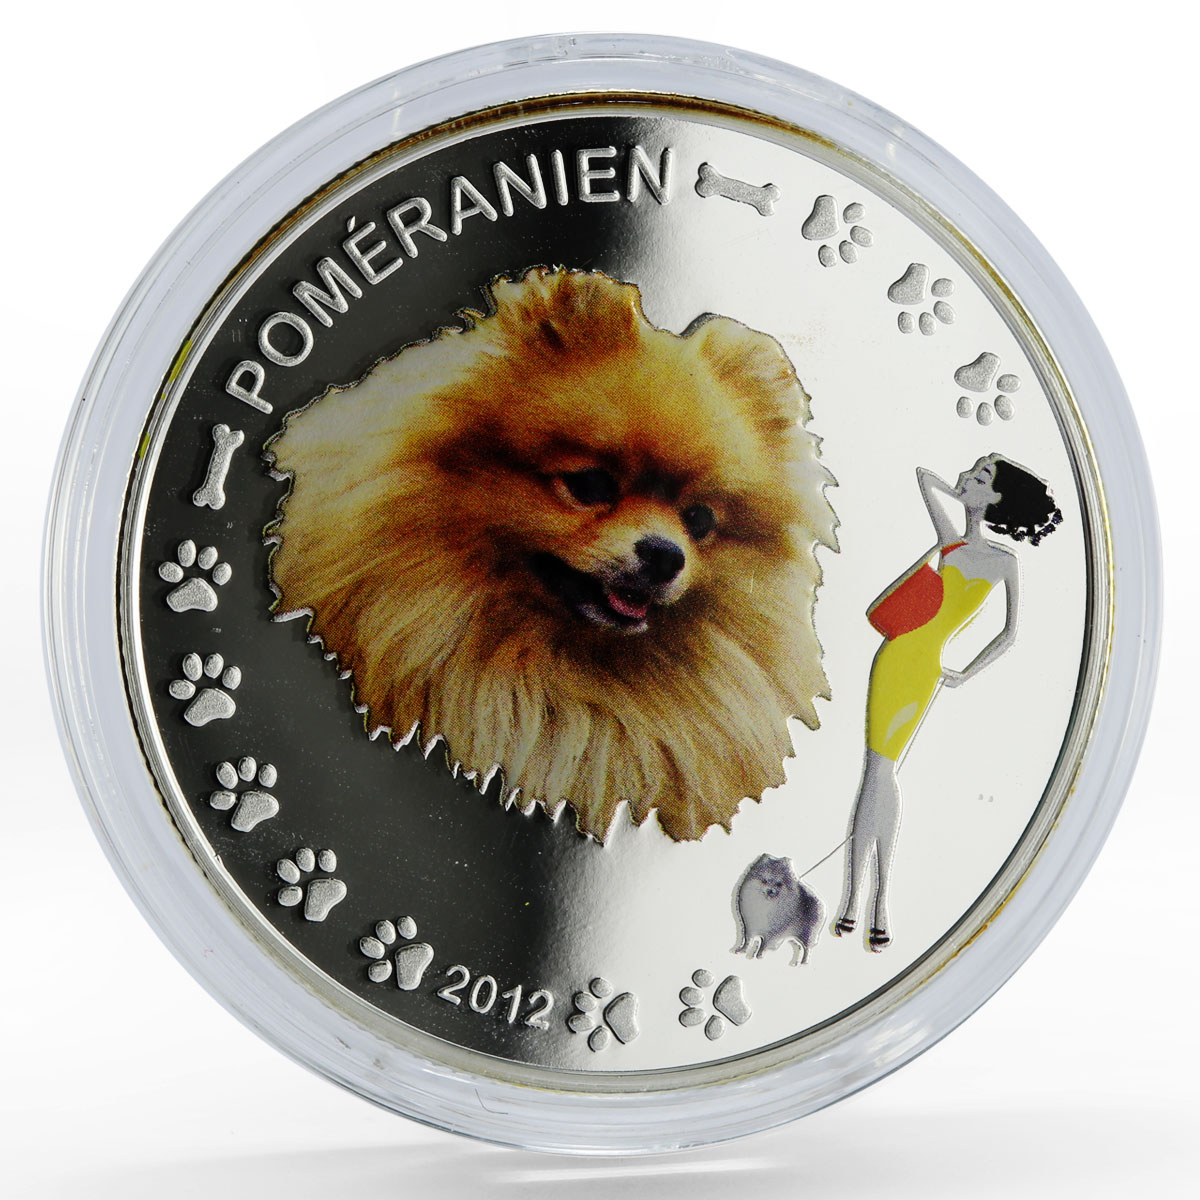 Benin 1000 francs Pomeranian Dog colored proof silver coin 2012